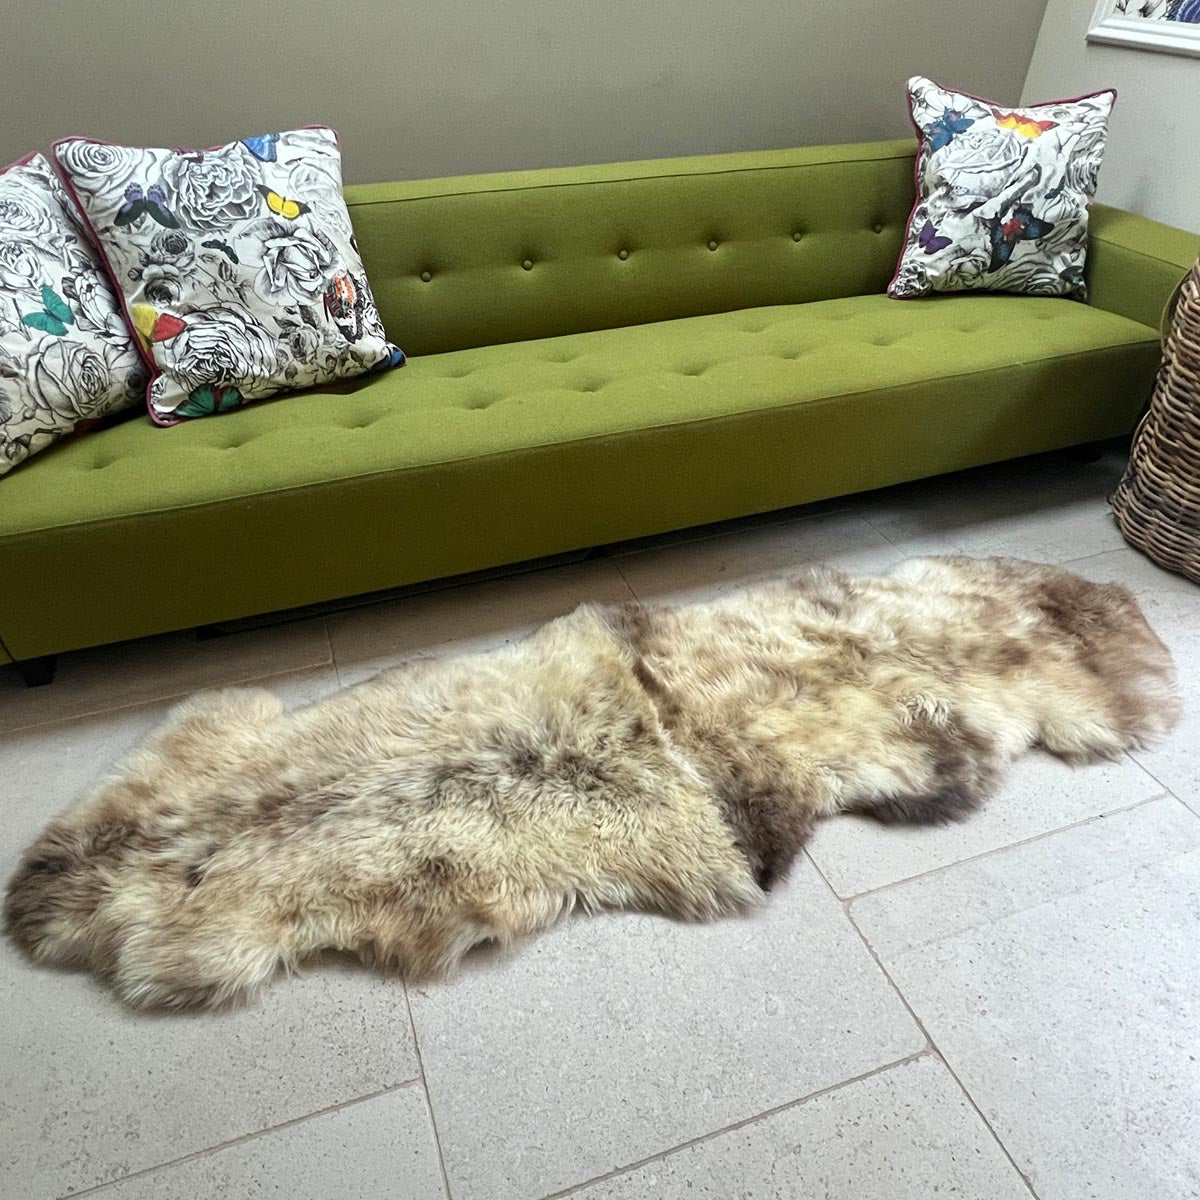 Rare Breed Champagne Mix British Sheepskin Fur Rug 100% Natural White Runner | Double Back to Back